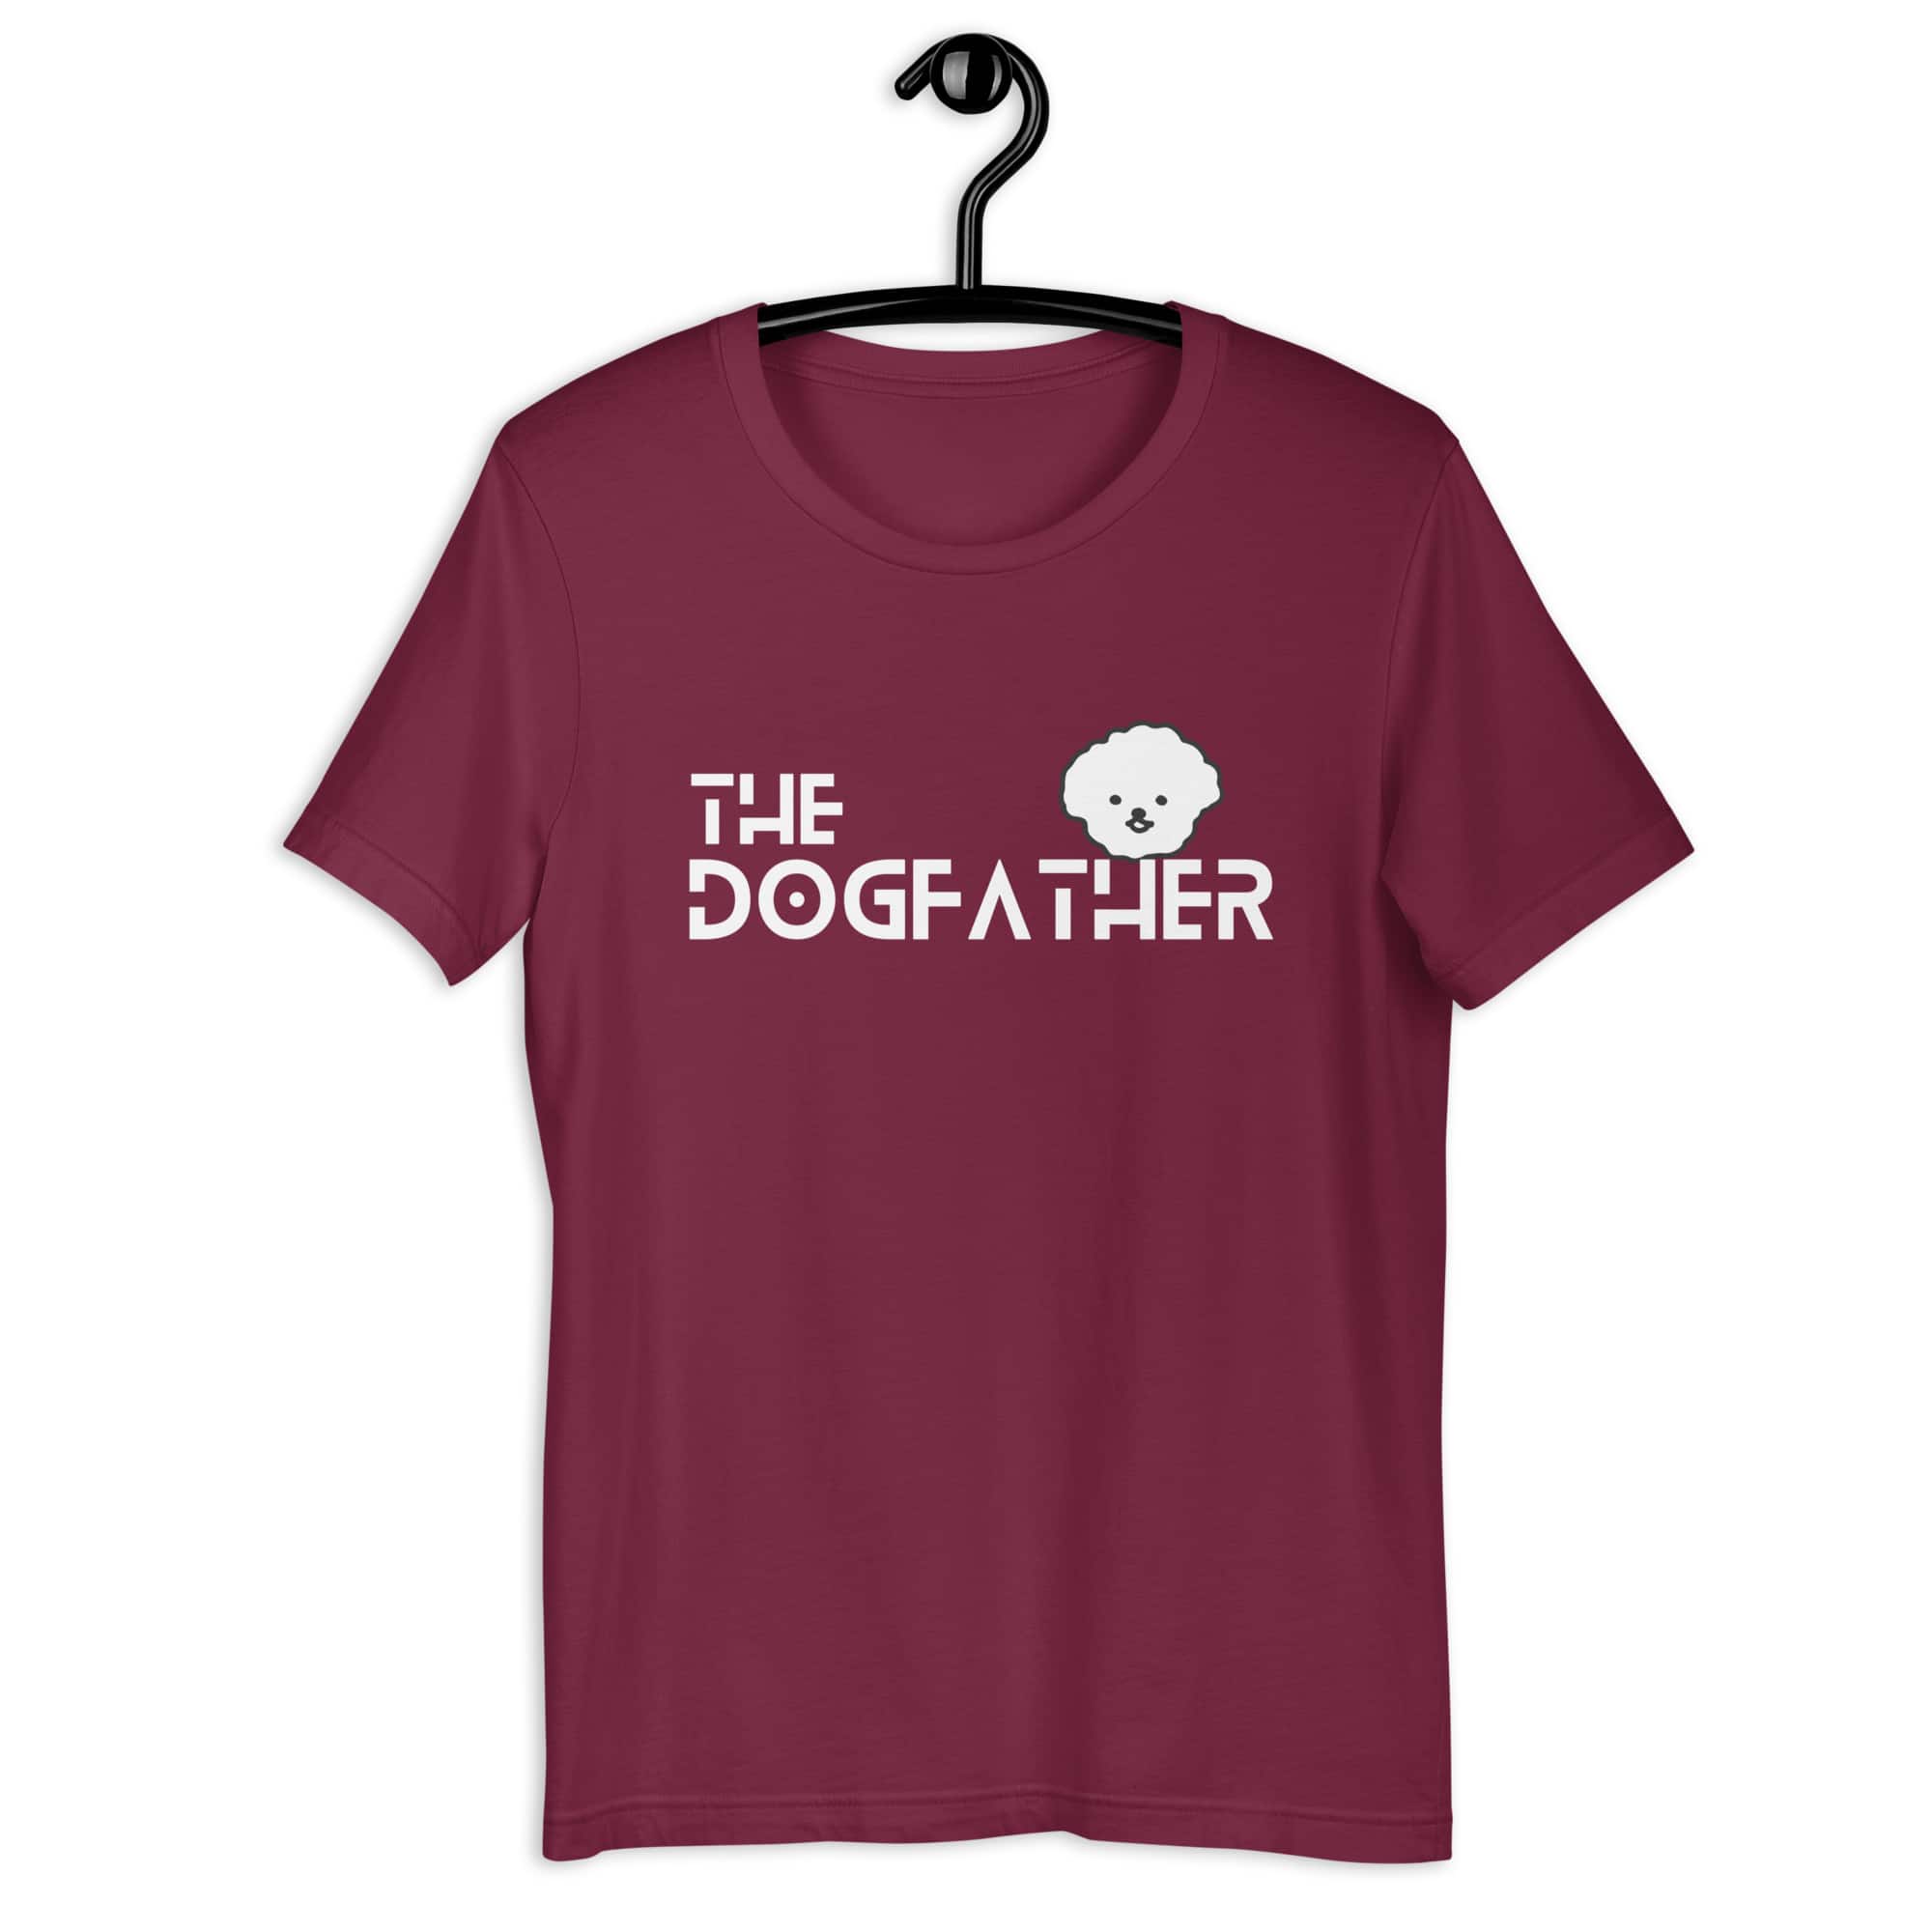 The Dogfather Poodles Unisex T-Shirt. Maroon